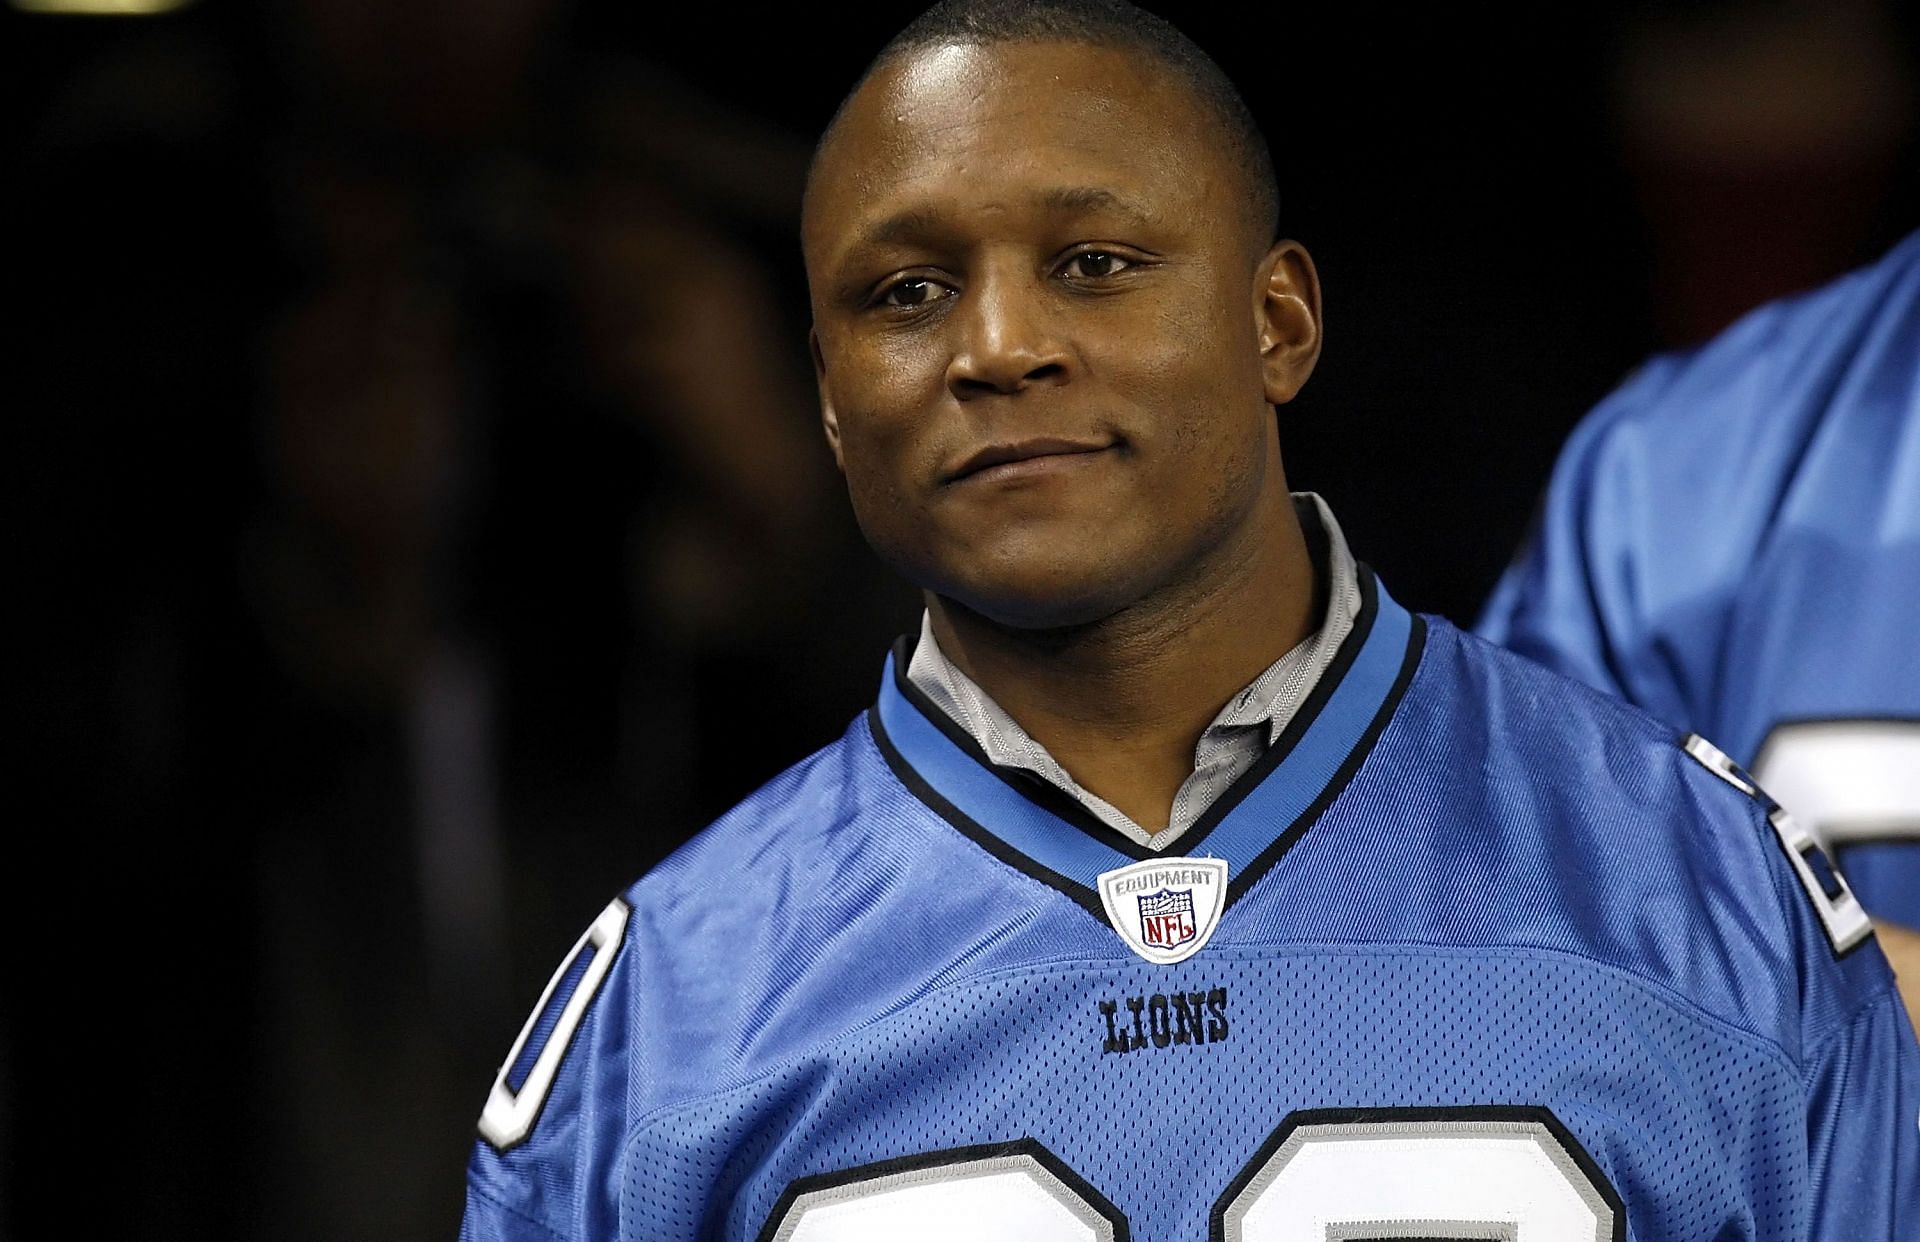 Ranking the 3 greatest running backs in Detroit Lions history